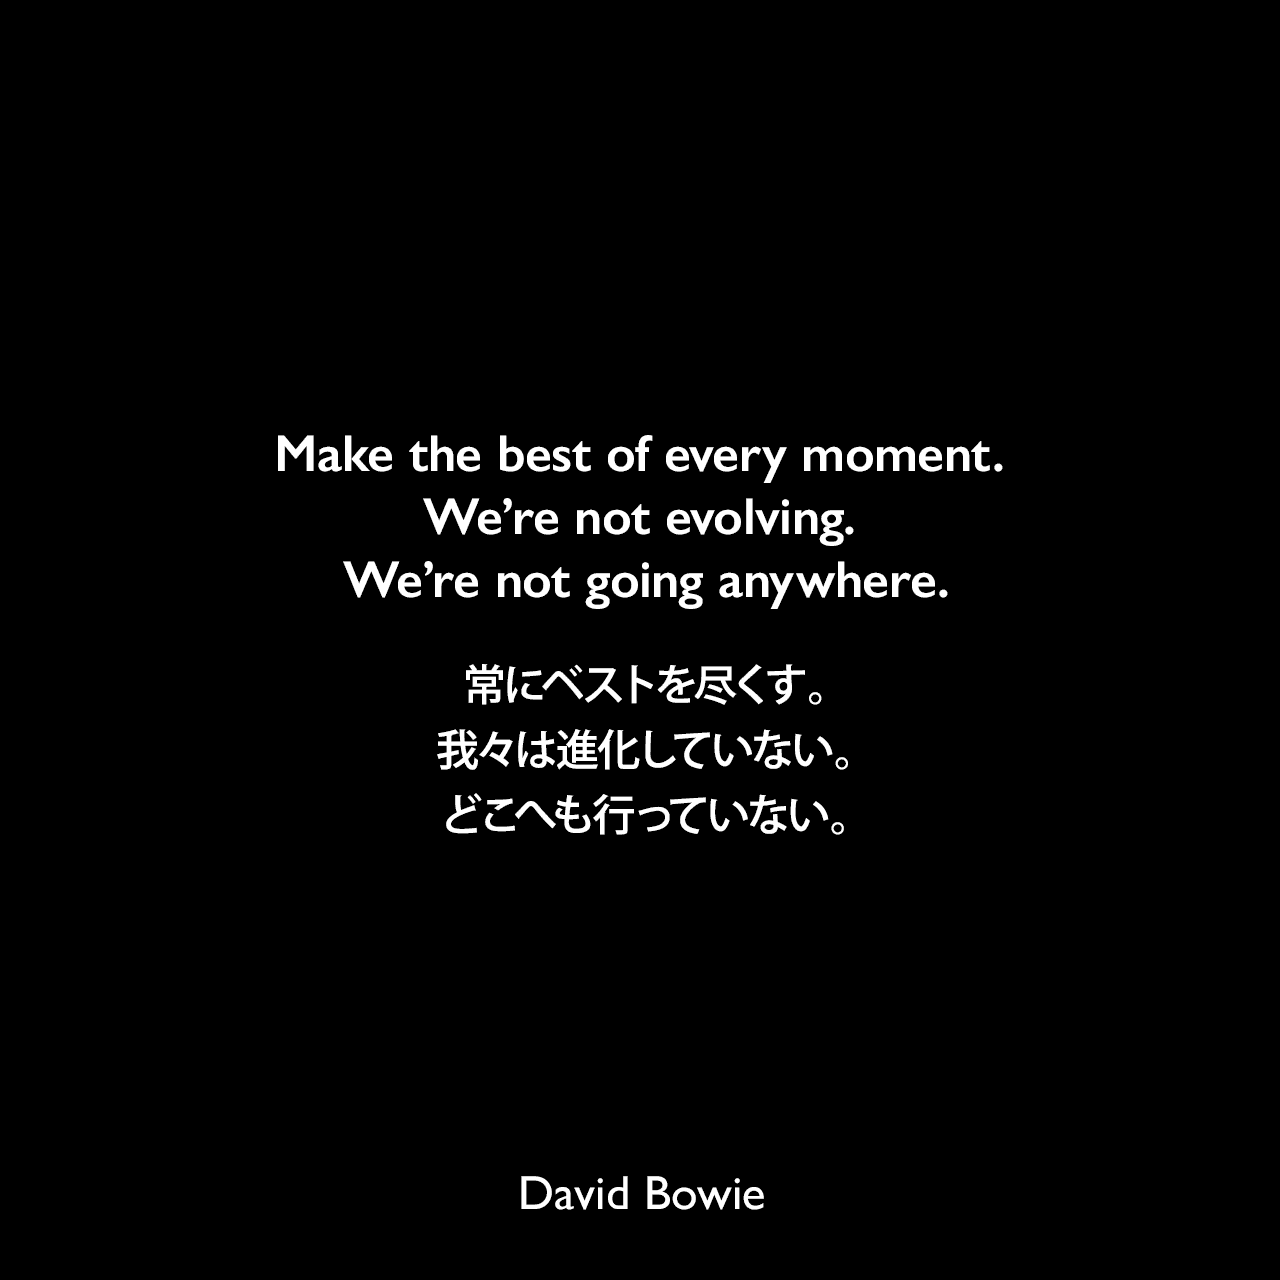 Make the best of every moment. We’re not evolving. We’re not going anywhere.常にベストを尽くす。我々は進化していない。どこへも行っていない。David Bowie